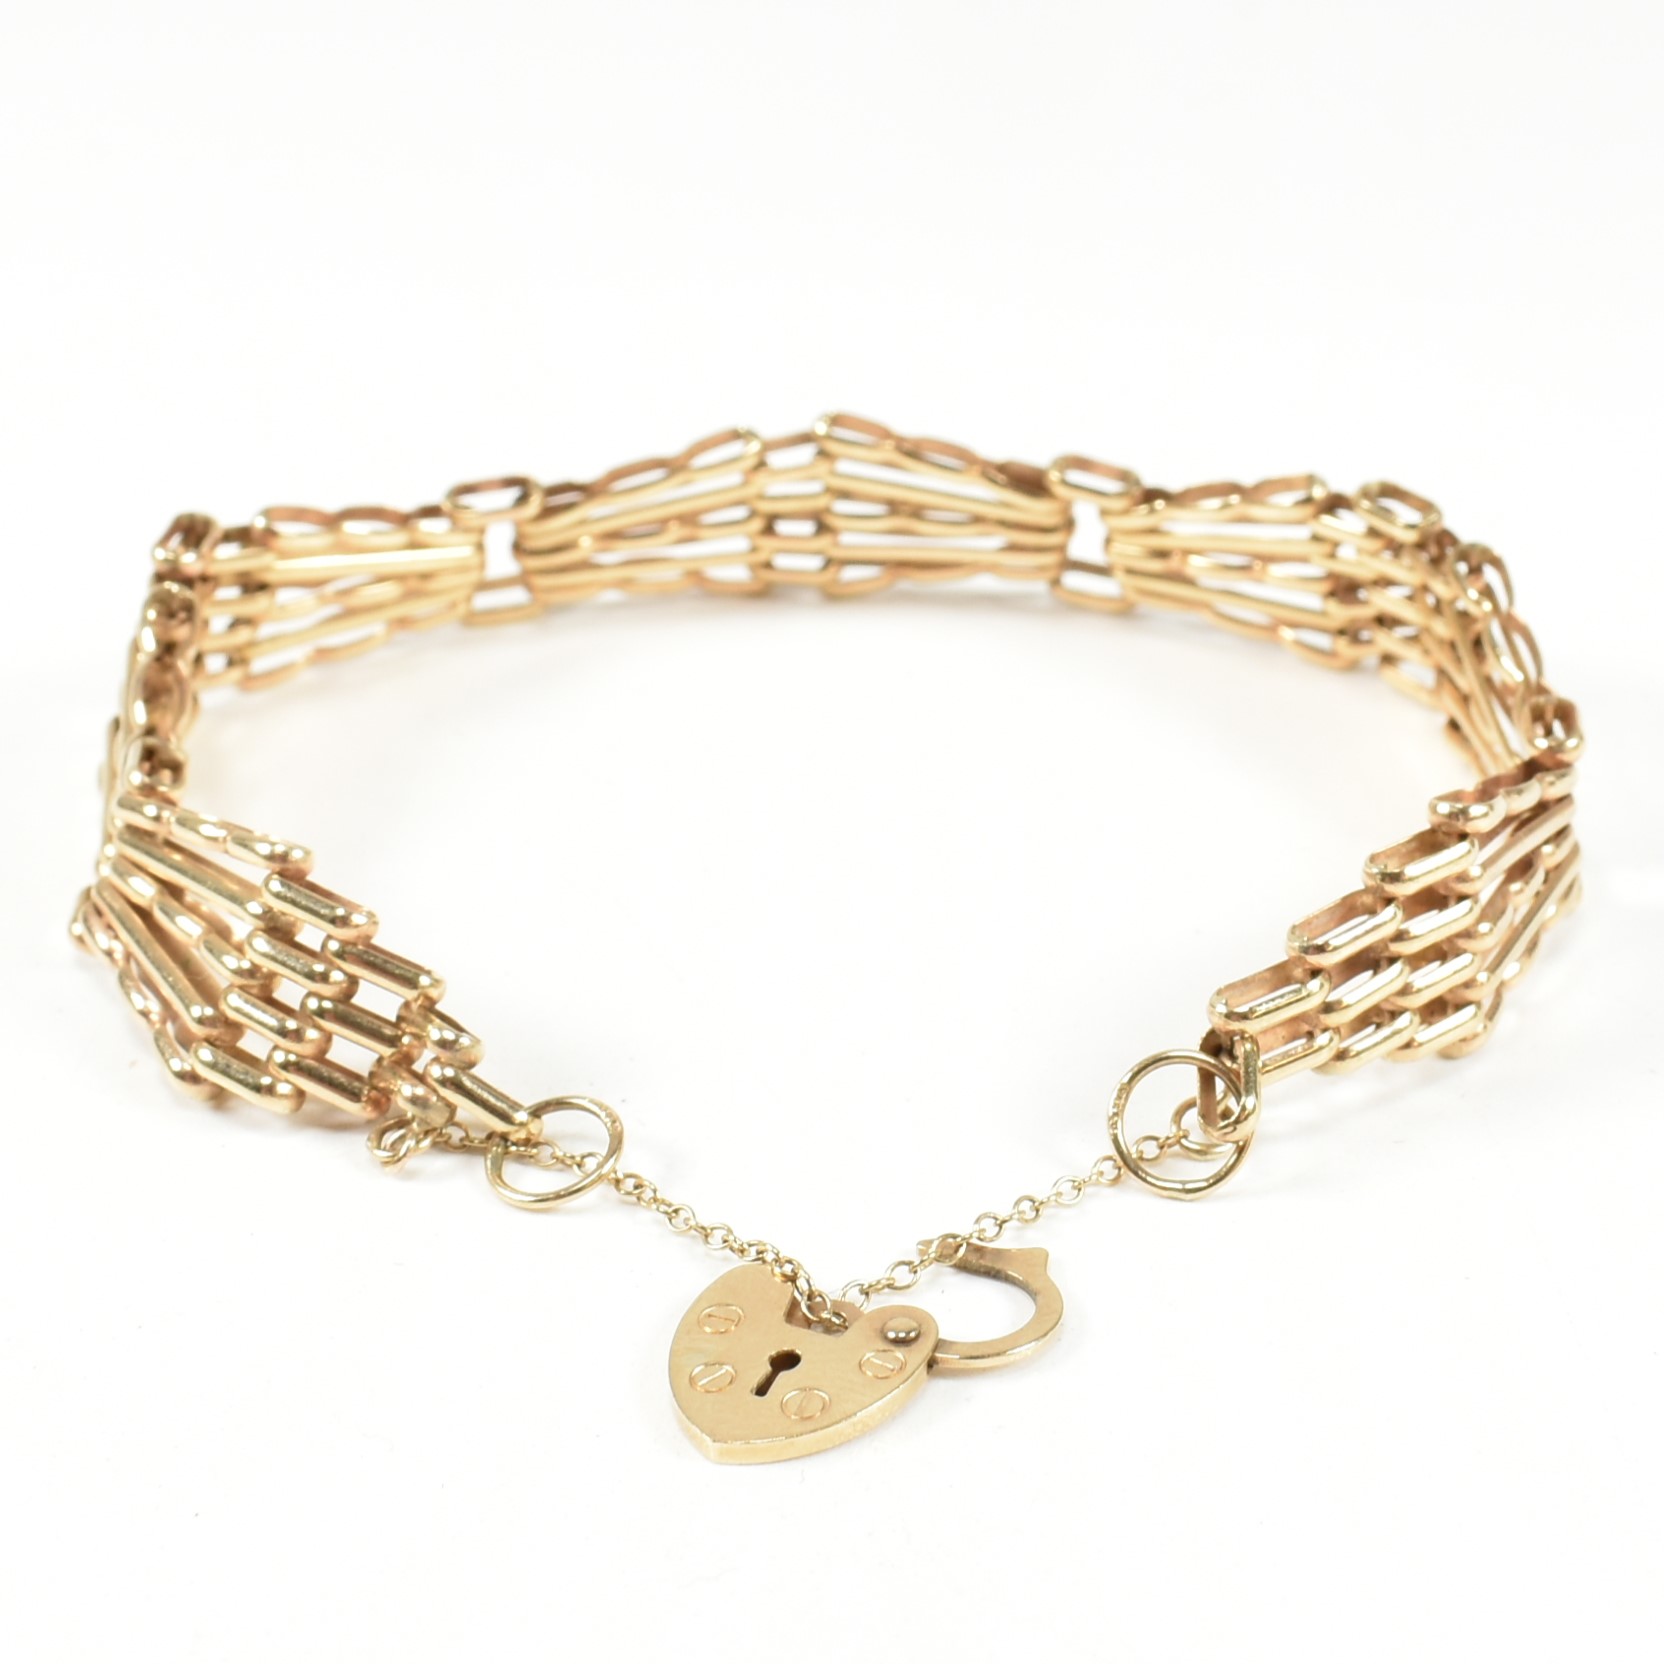 HALLMARKED 9CT GOLD GATE LINK BRACELET WITH HEART PADLOCK CLASP - Image 5 of 9